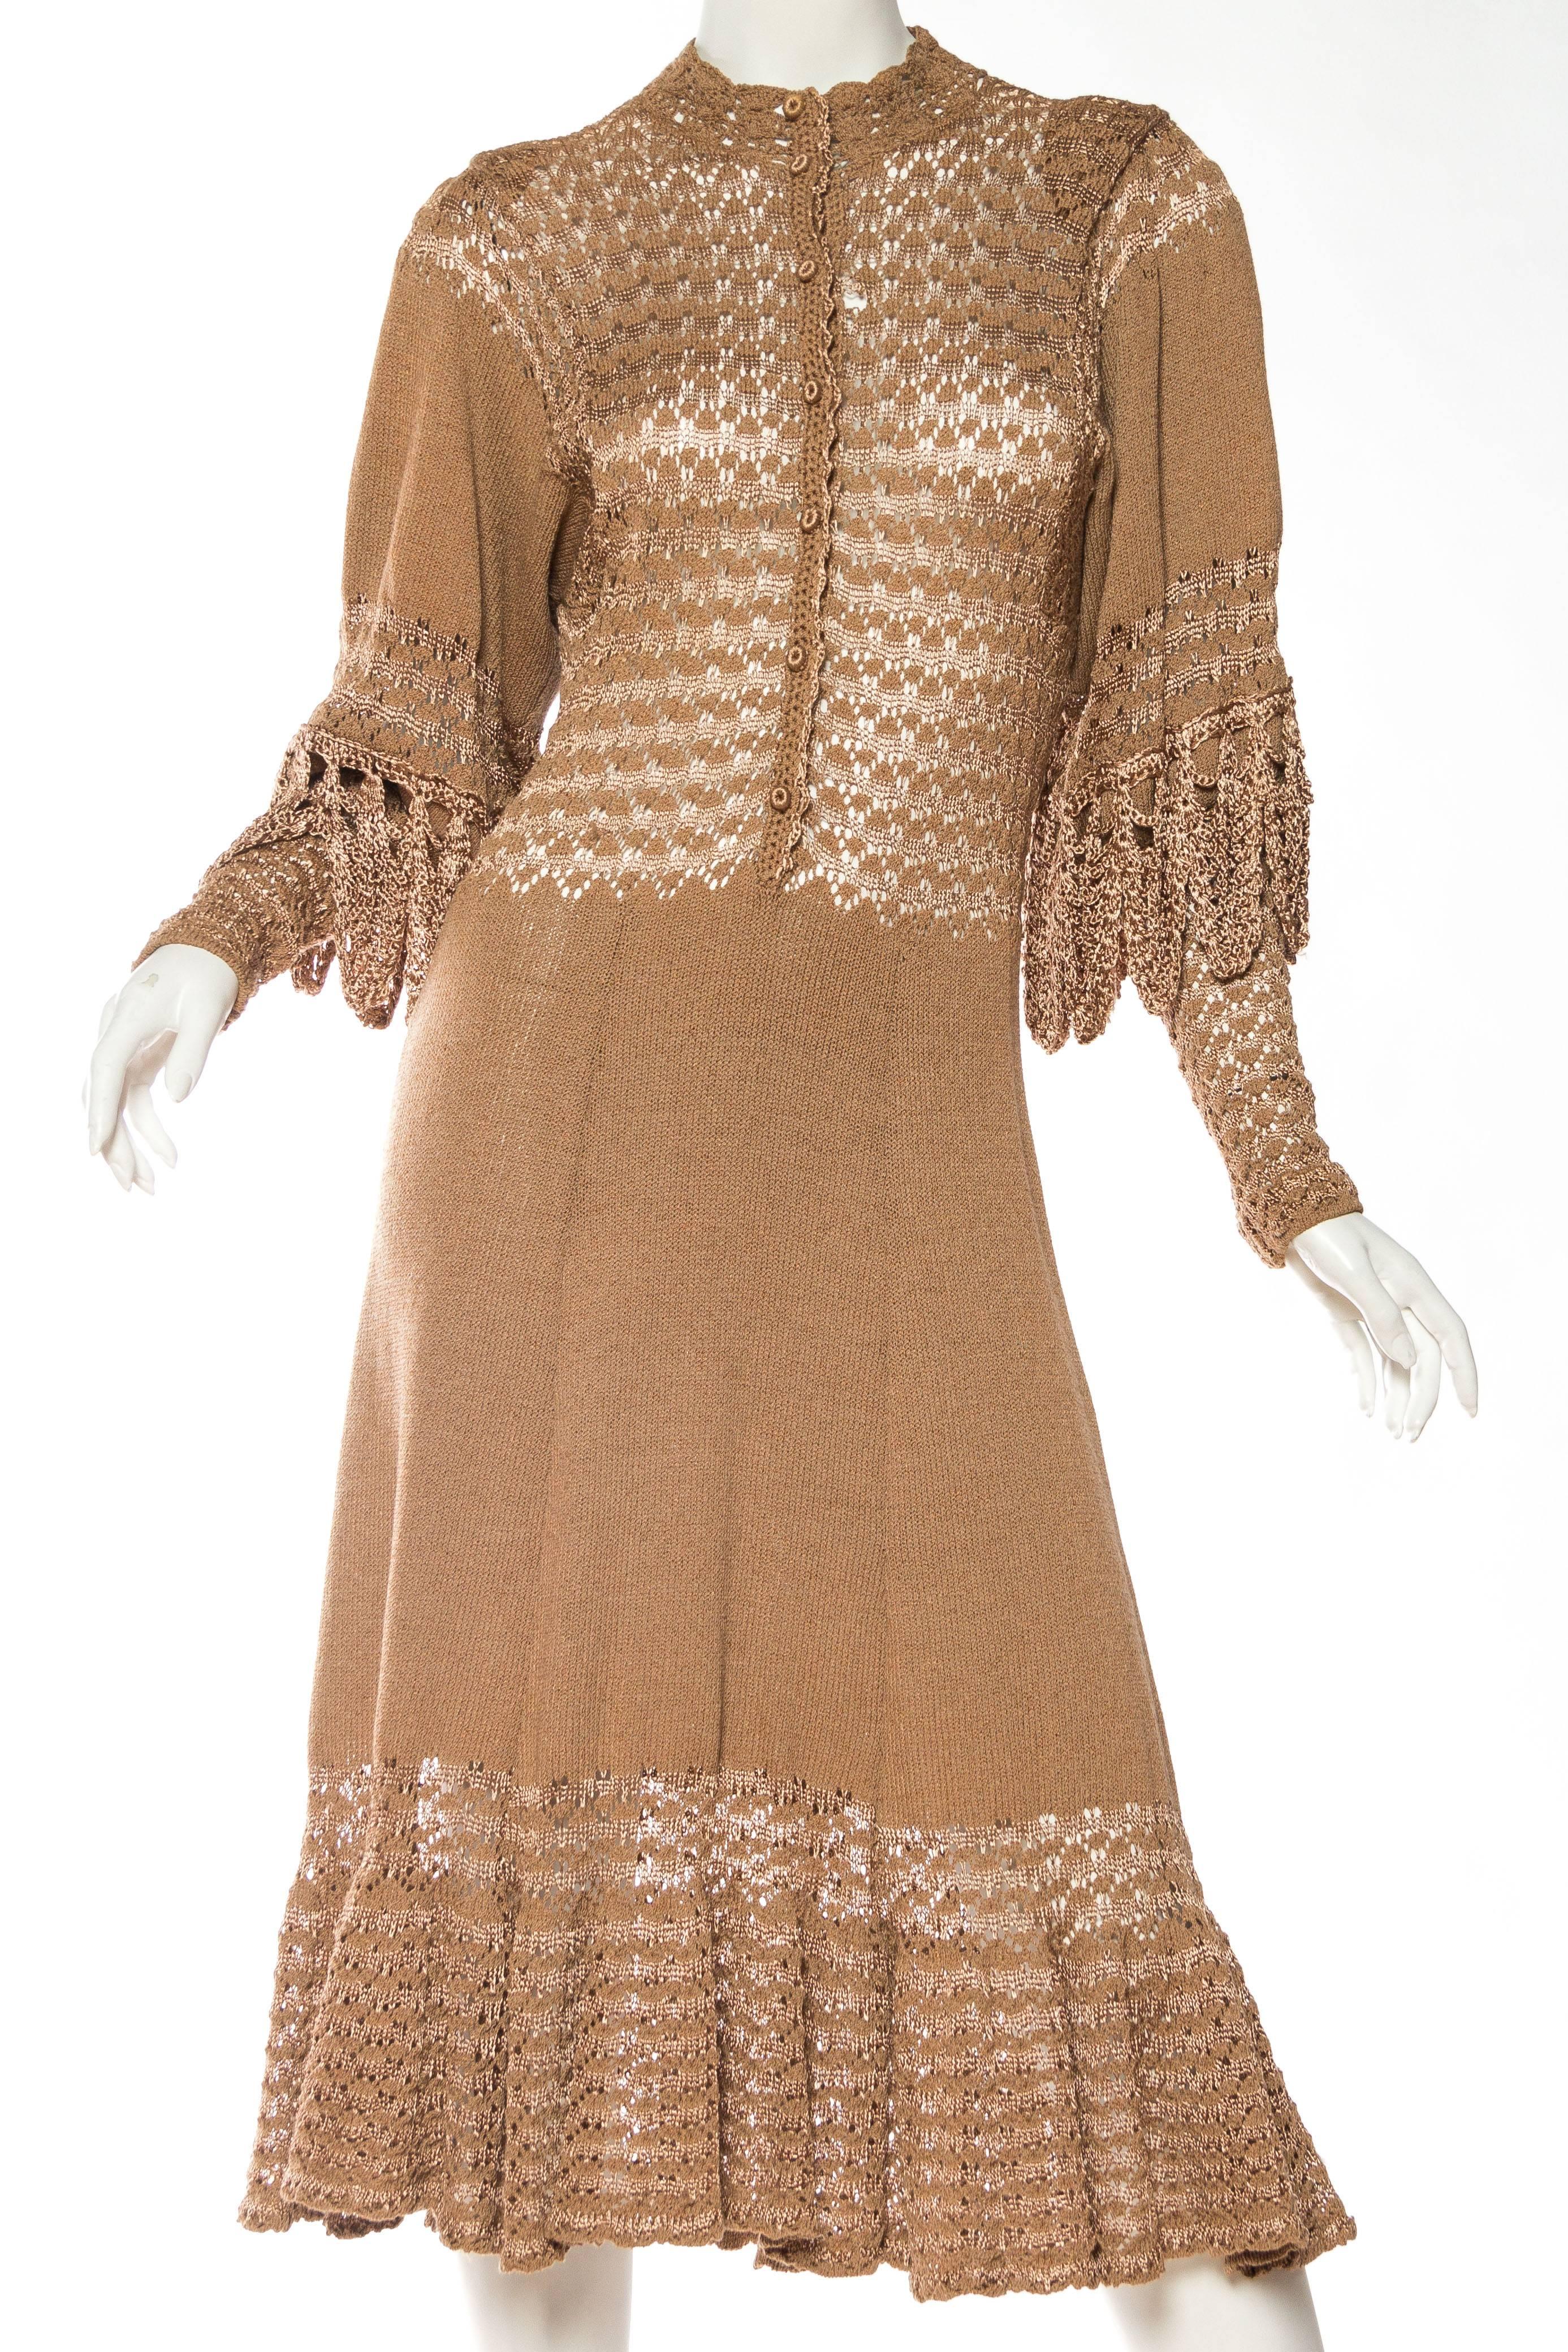 Brown 1970s Victorian Revival Knit Dress